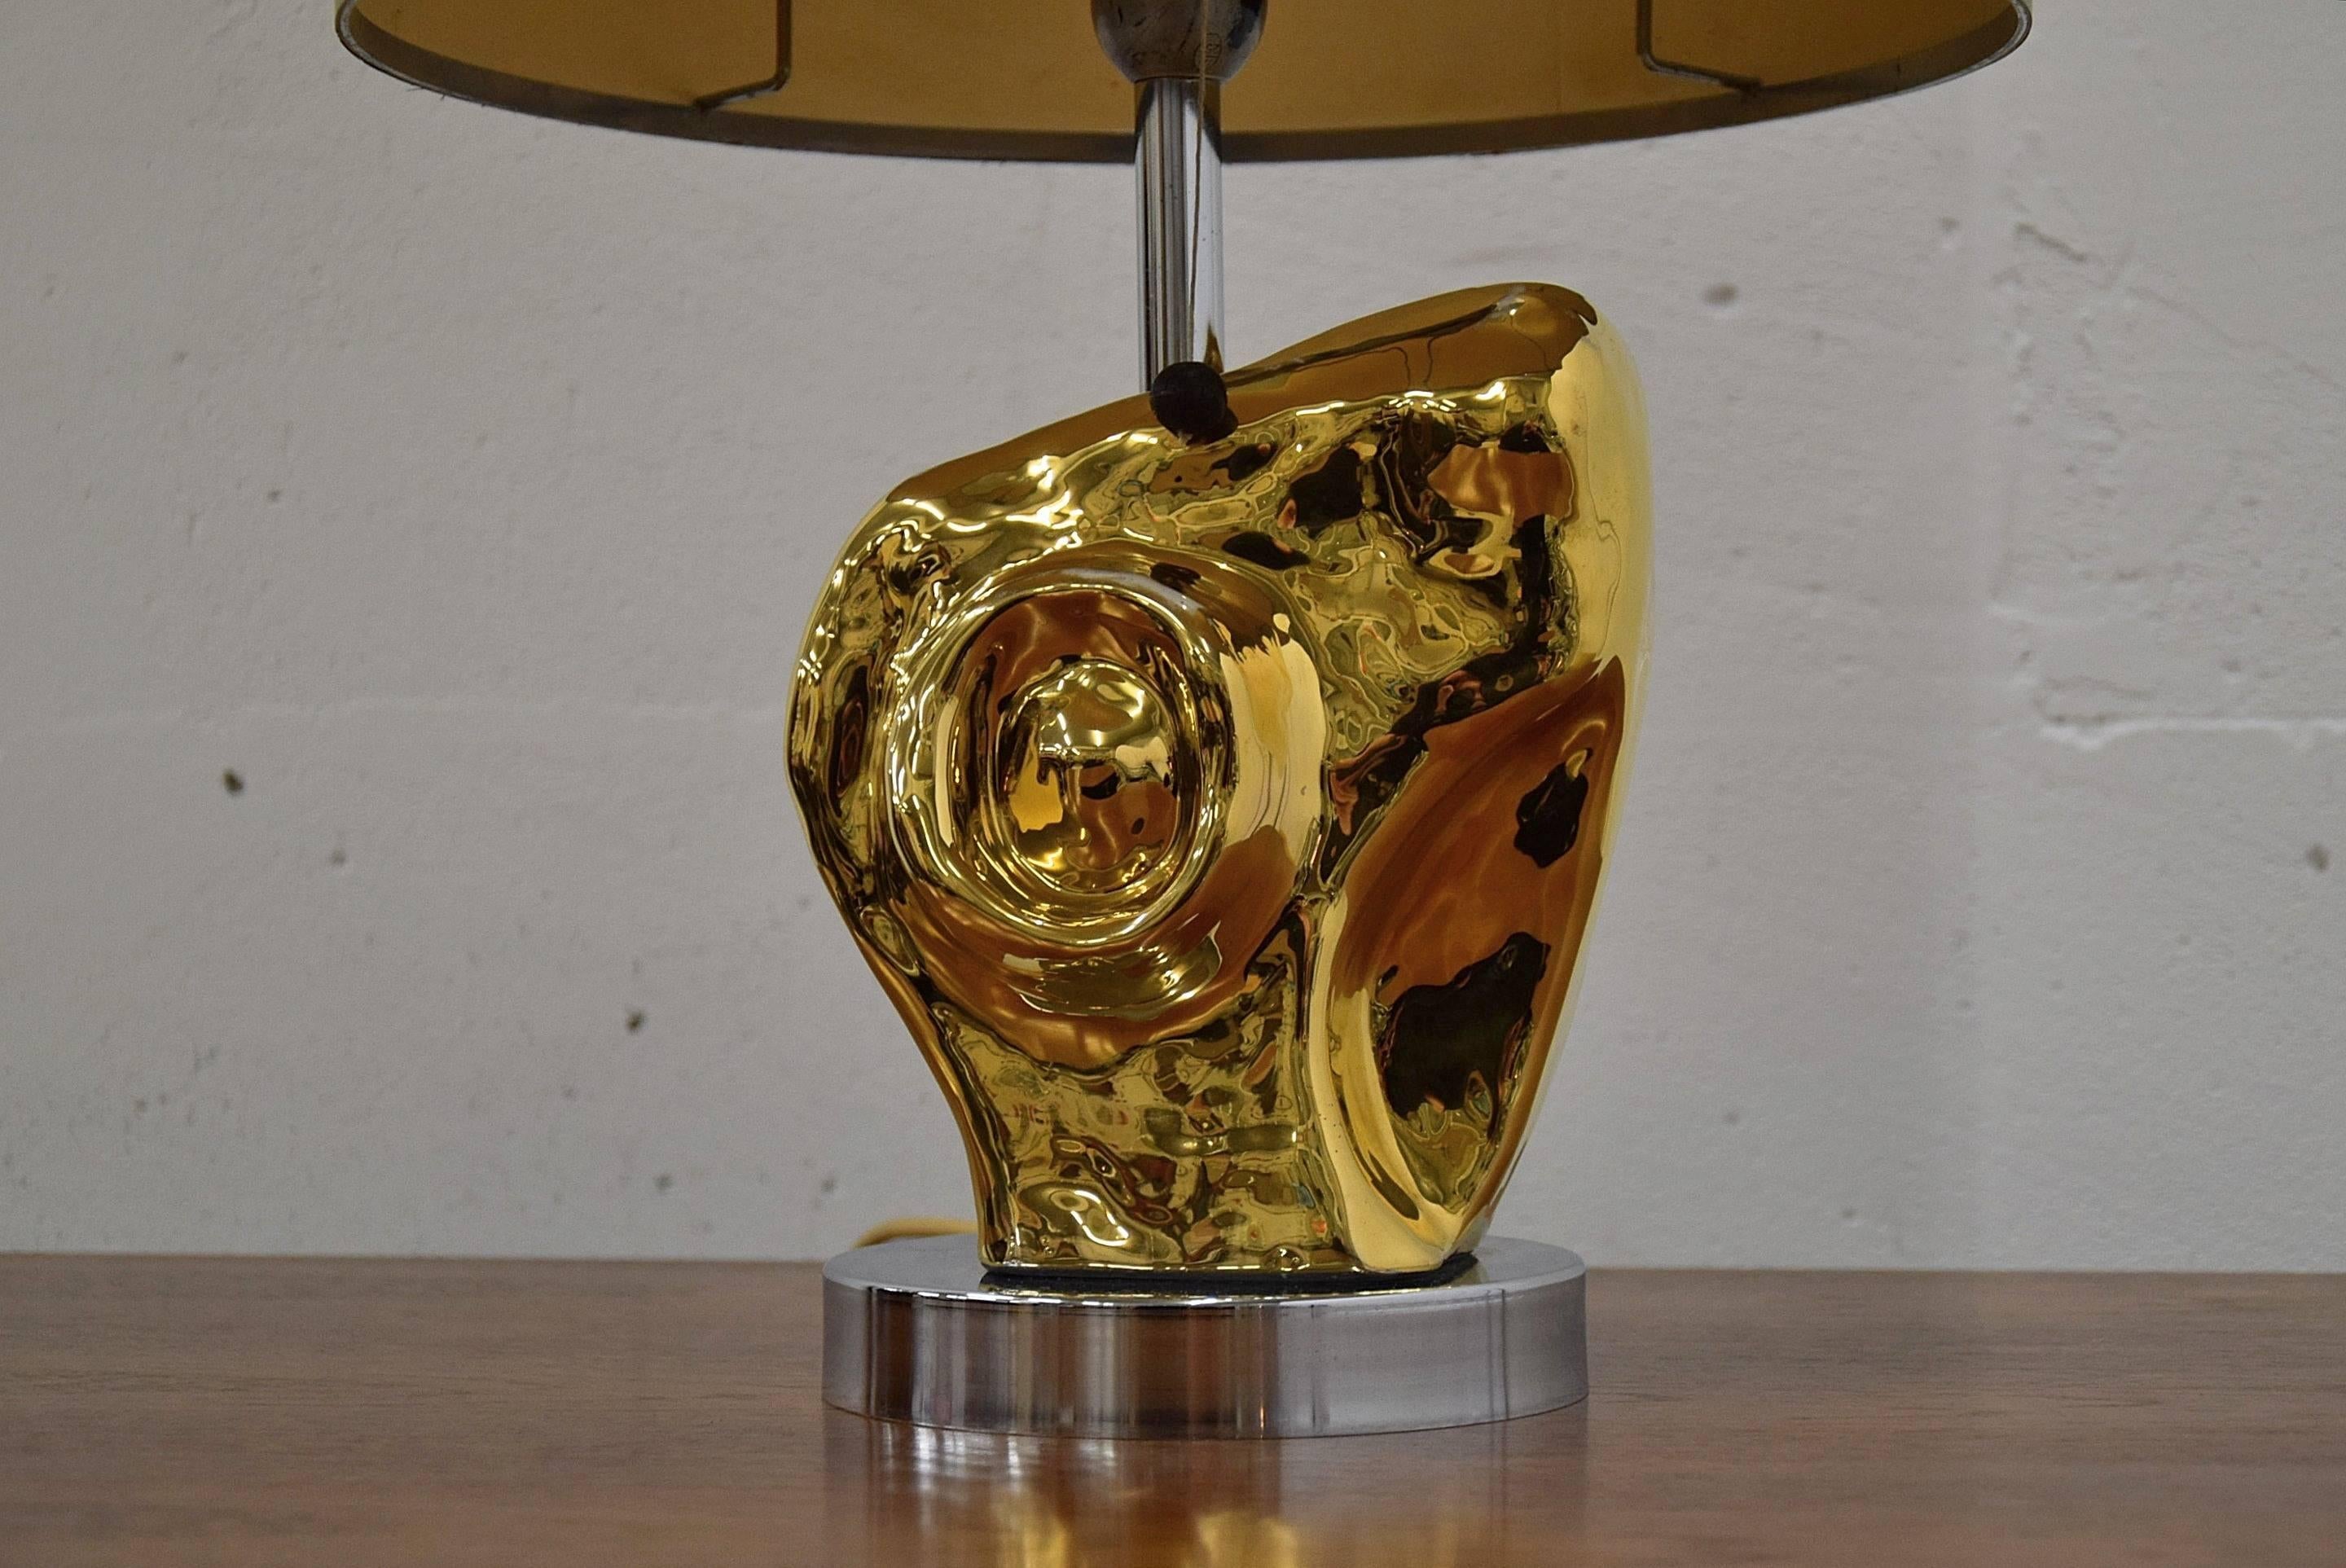 Paolo Granchi Hollywood regency table lamp
Exclusive late 1960s gold plated ceramic table lamp designed by the sculptor Paolo Granchi from Pisa, Italy. This lamp was produced in a very limited edition by Sigma L2.

The lamp comes with it's original